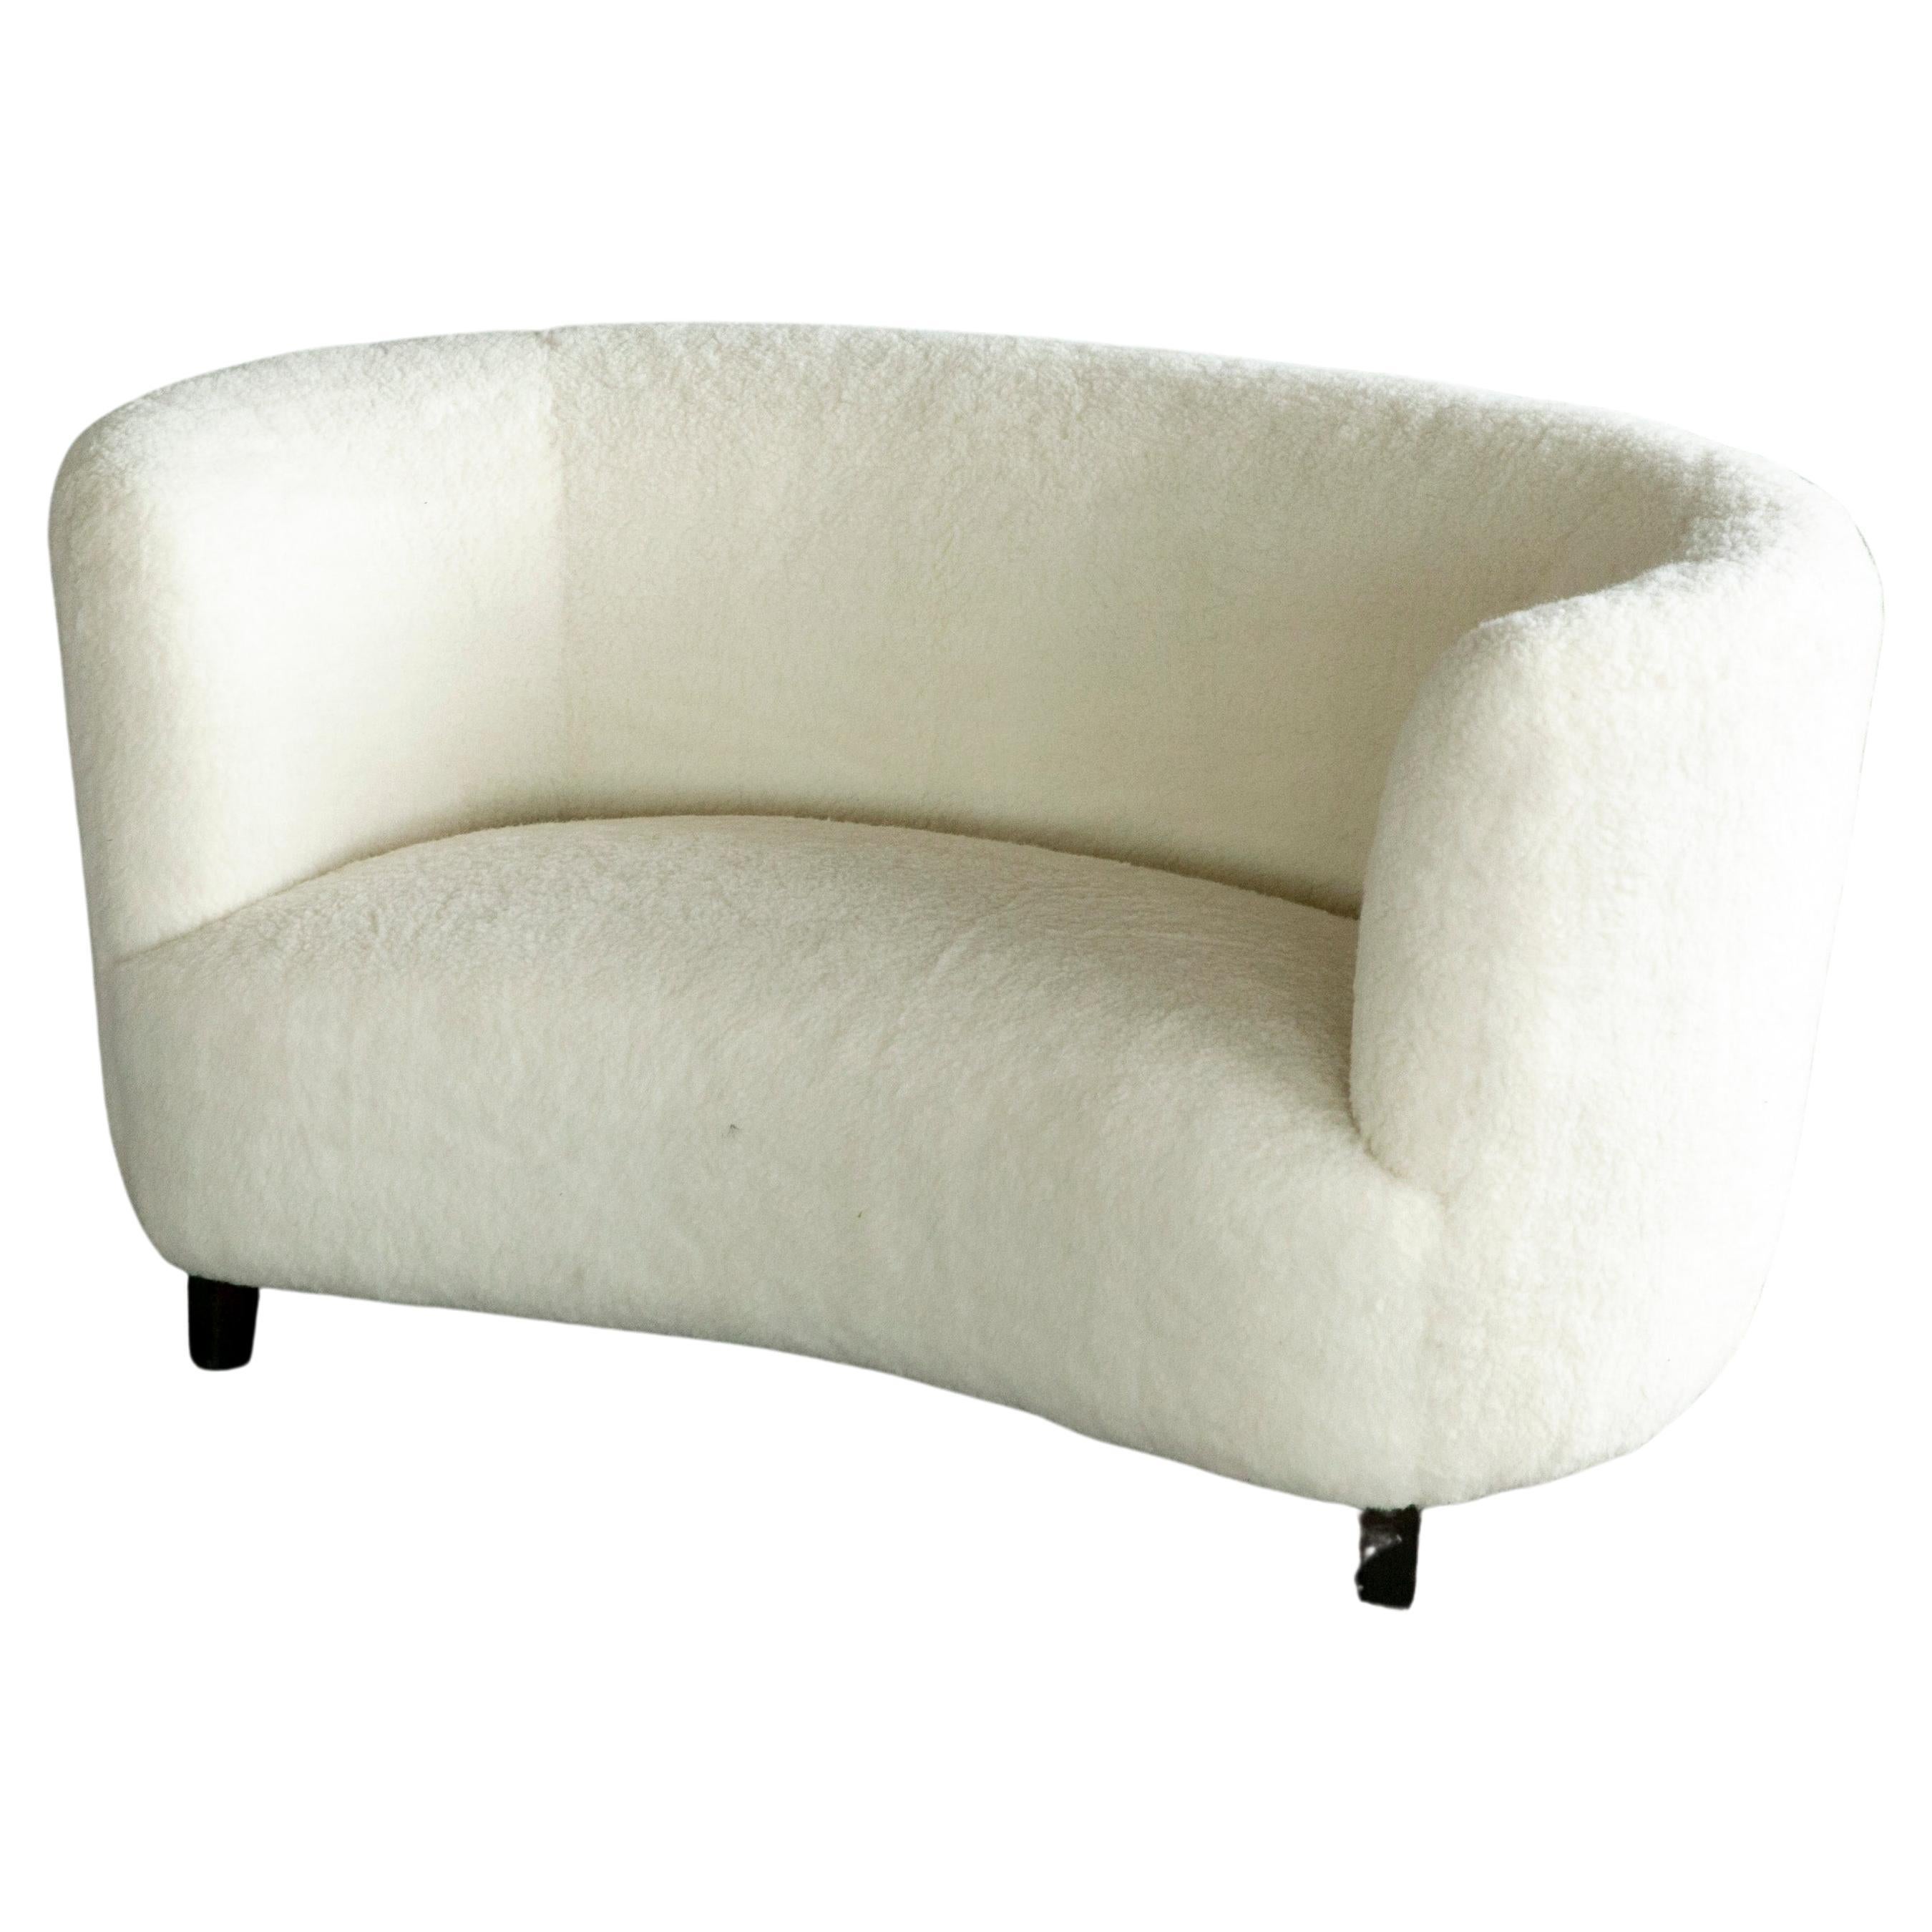 Banana Shaped Curved Loveseat or Sofa Covered in Lambswool Denamrk 1940's For Sale